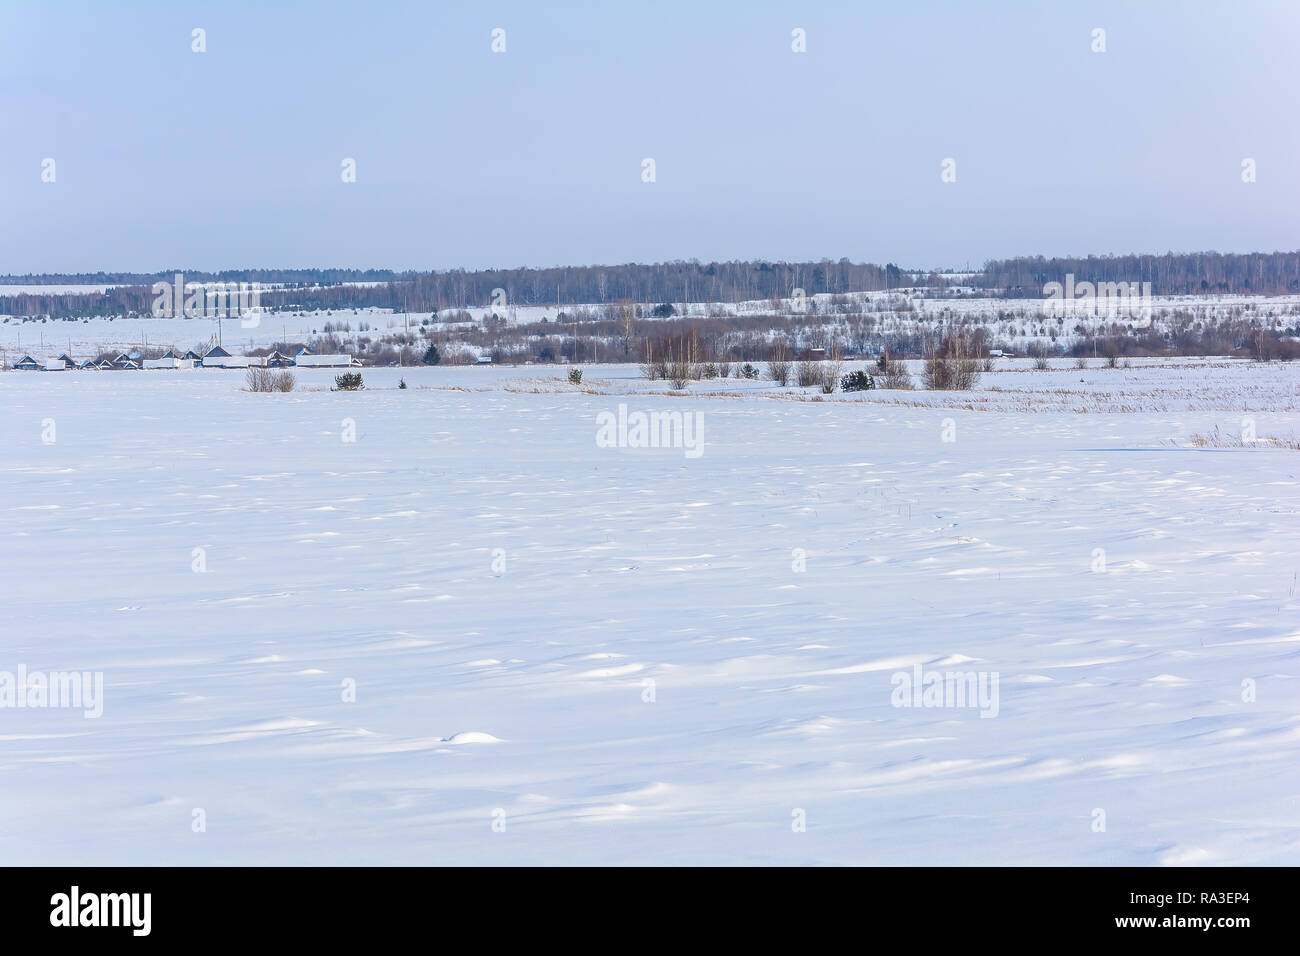 Snow-covered village near the field and forest in winter Stock Photo